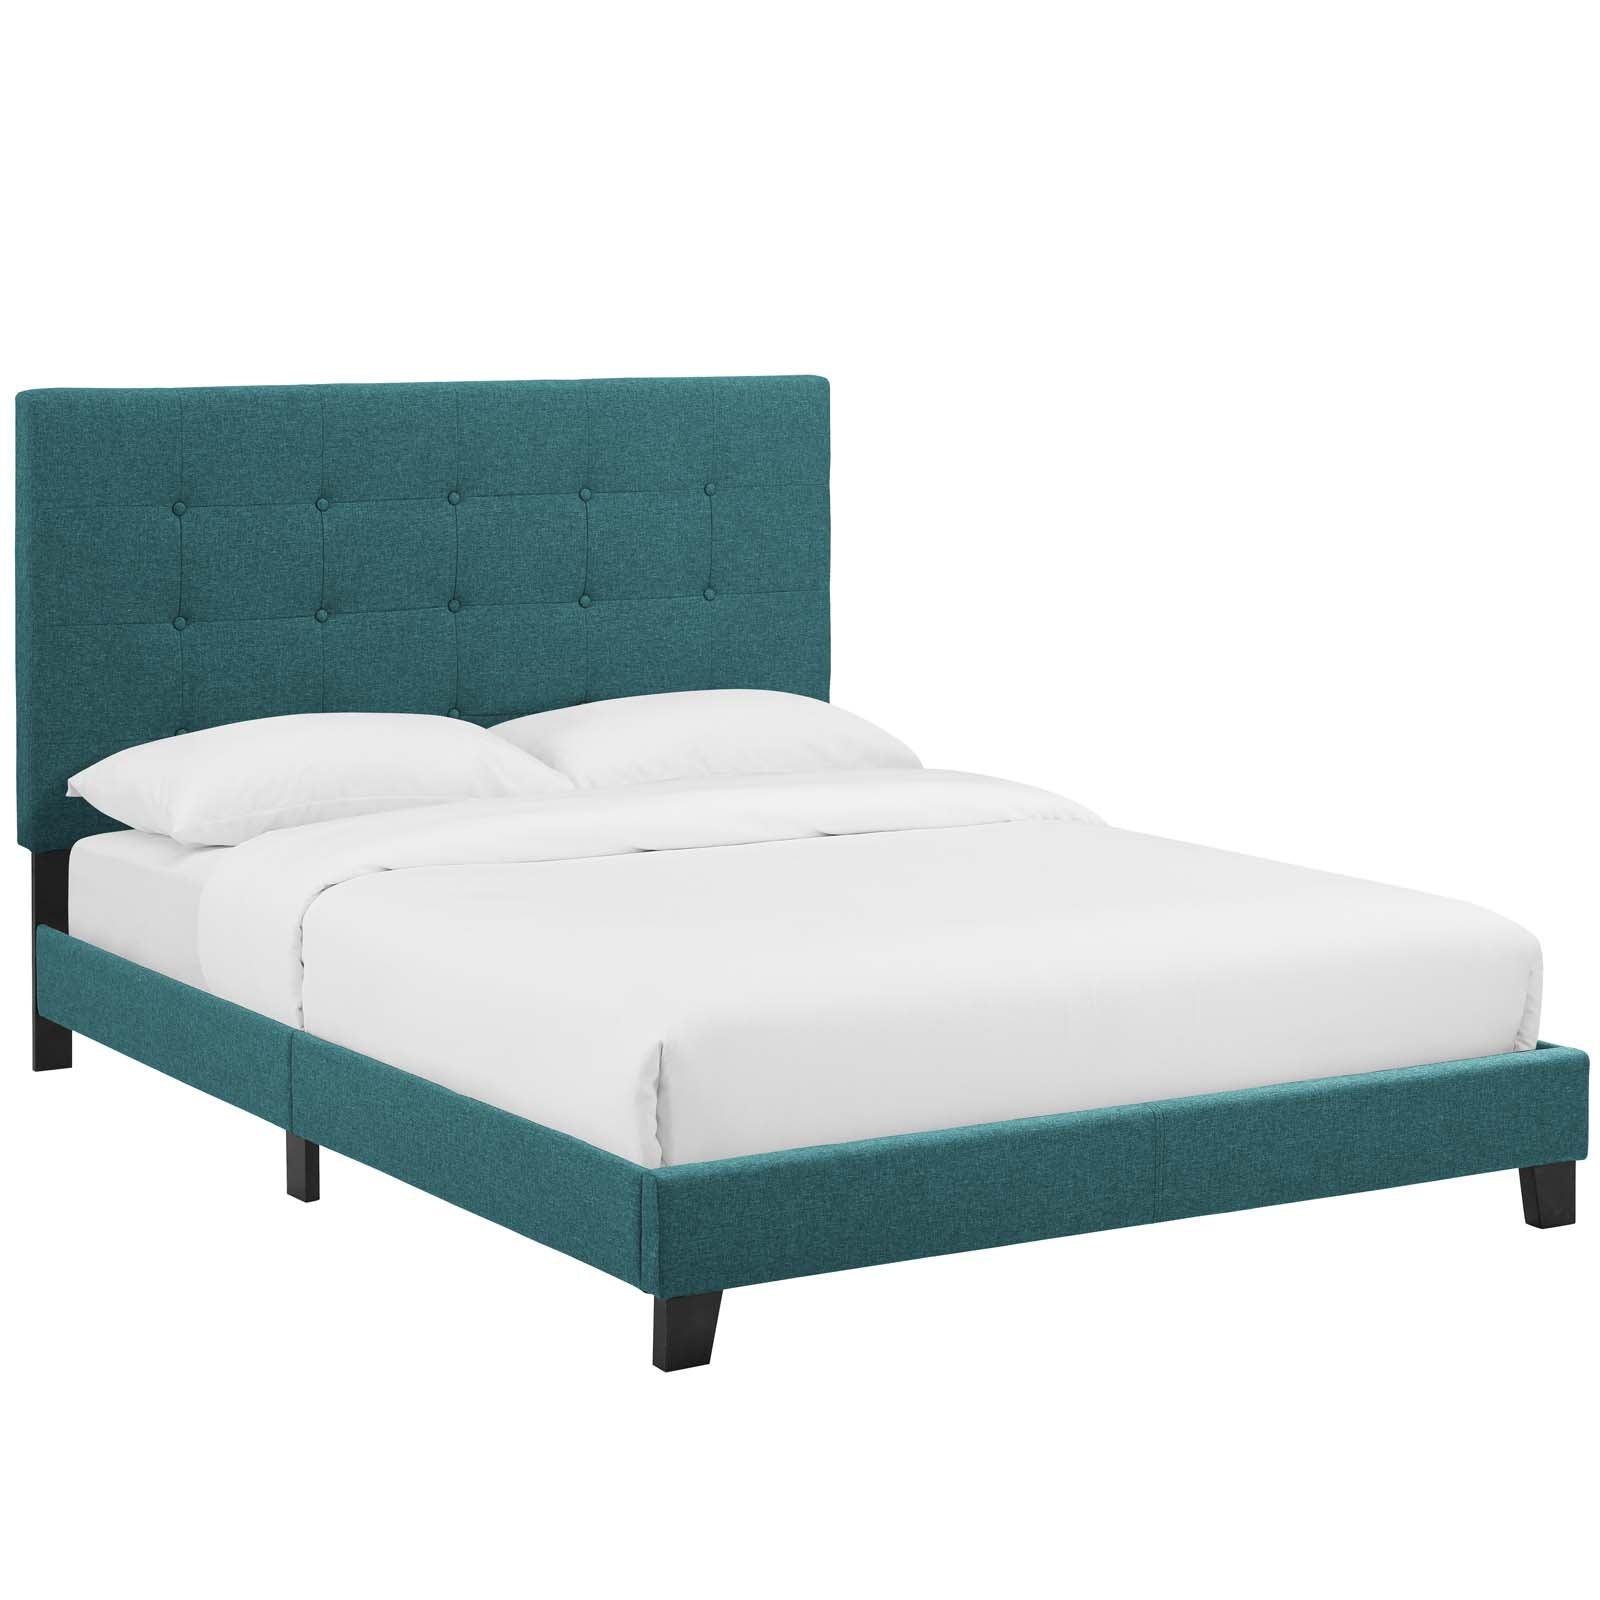 Modway Beds - Melanie Twin Tufted Button Upholstered Fabric Platform Bed Teal